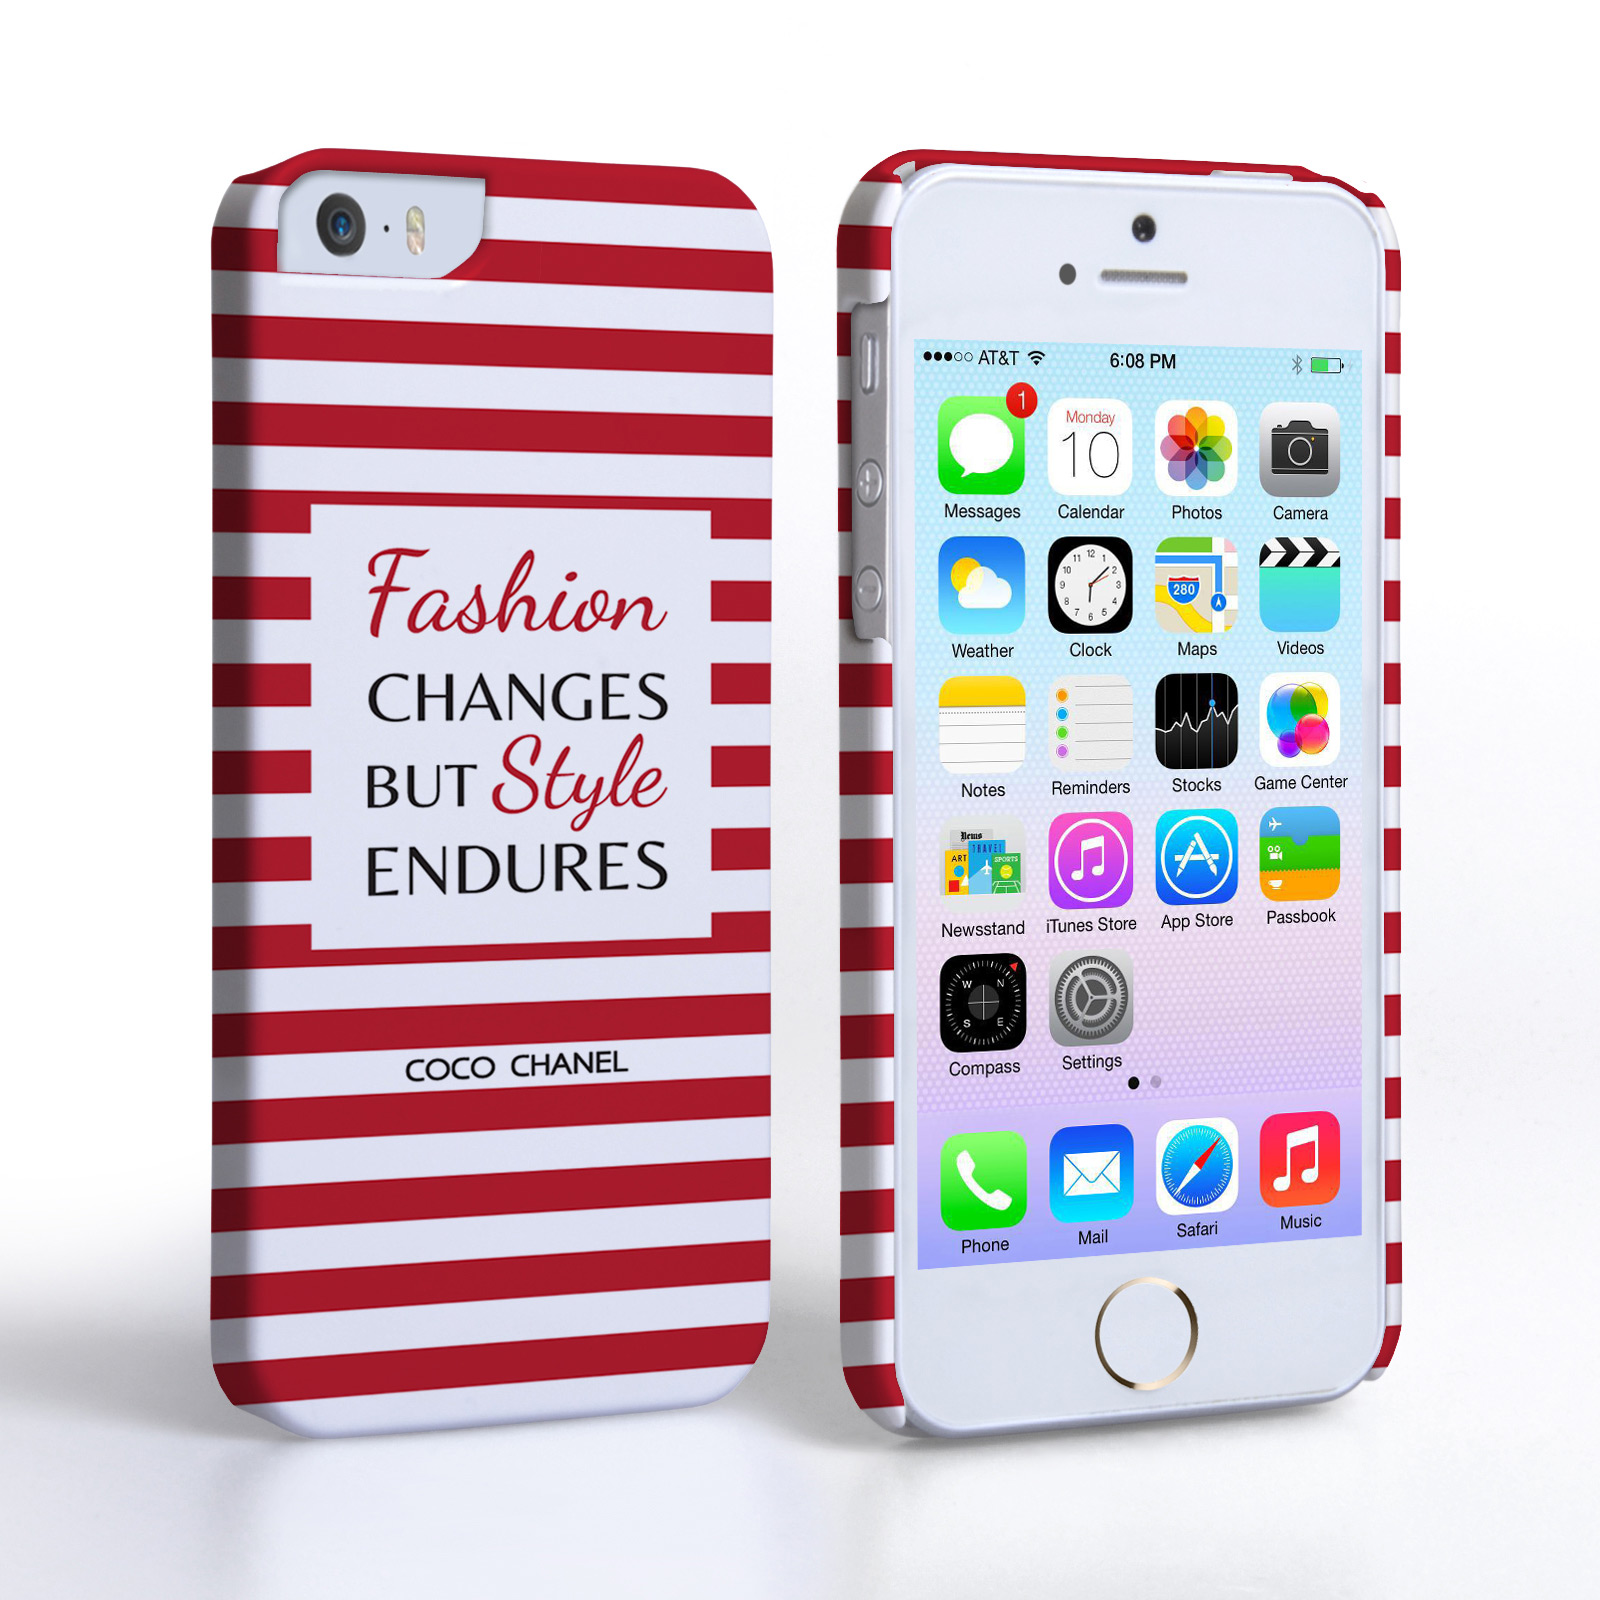 Caseflex iPhone 5/5s Chanel ‘Fashion Changes’ Quote Case – Red and White